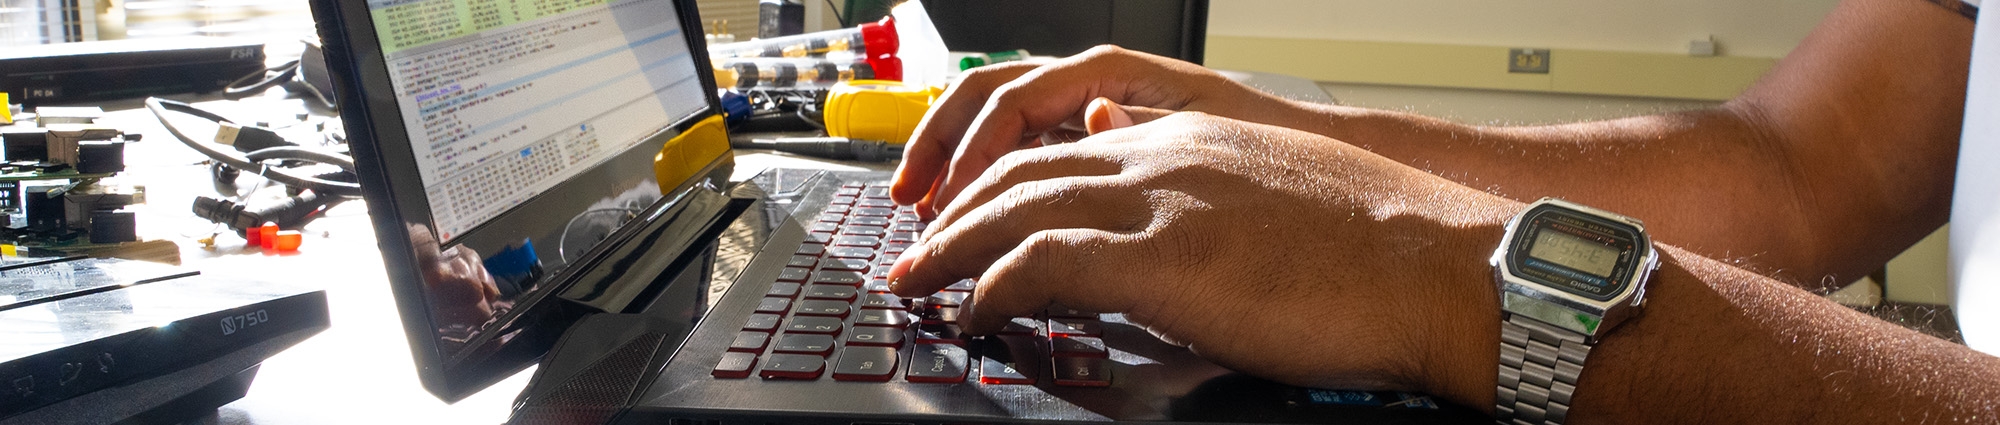 Close up of hands on a laptop keyboard with various computer and engineering related items nearby